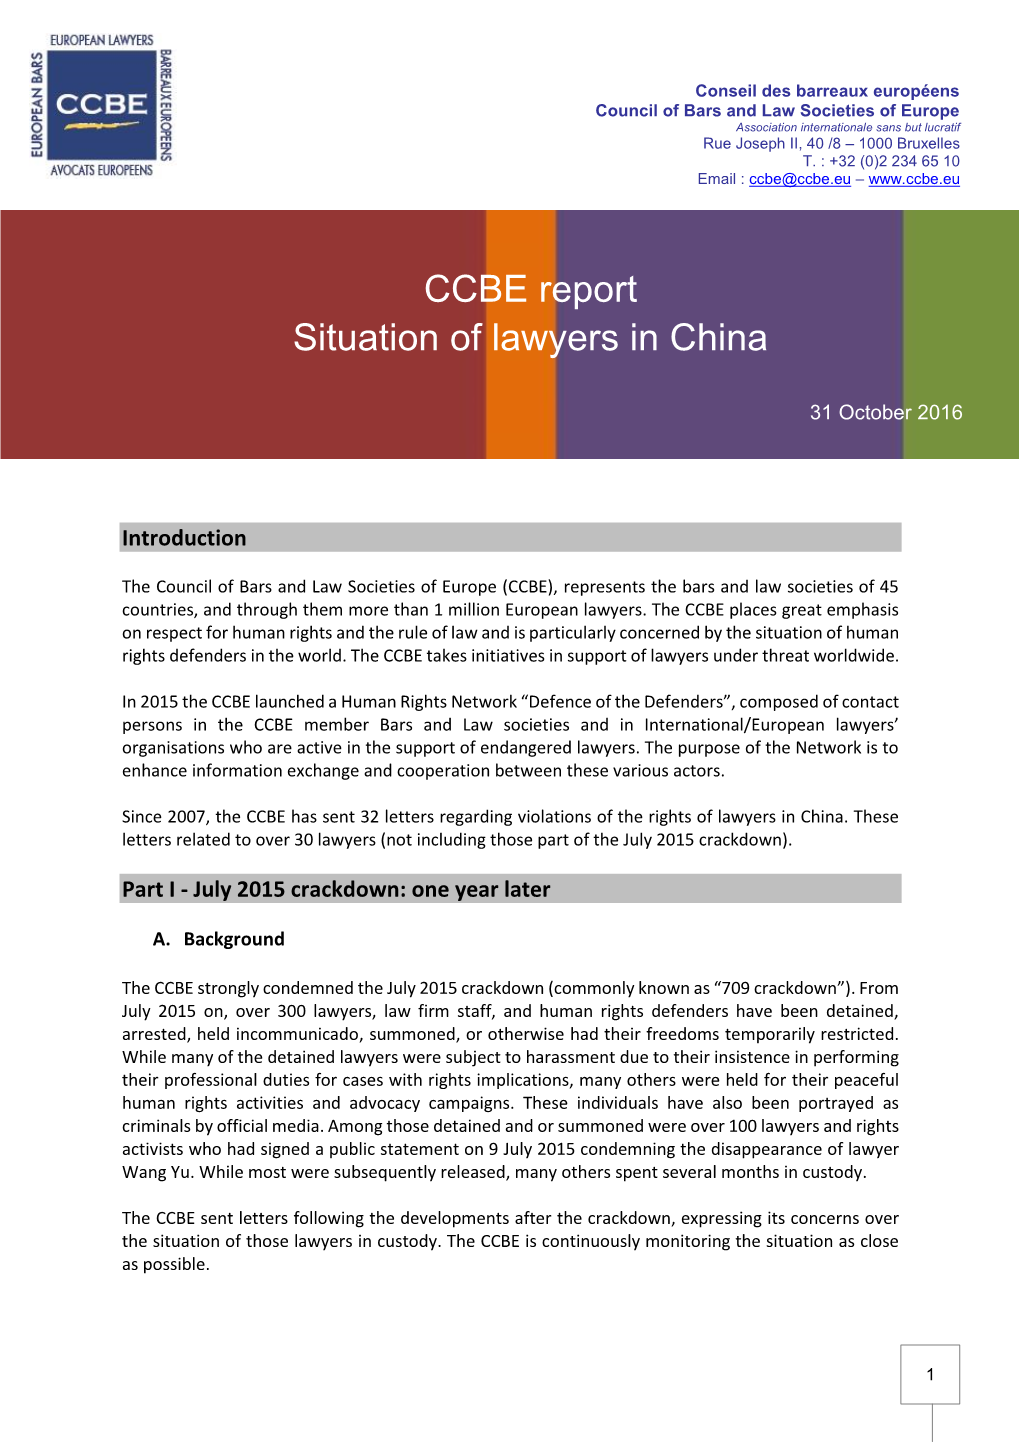 CCBE Report Situation of Lawyers in China